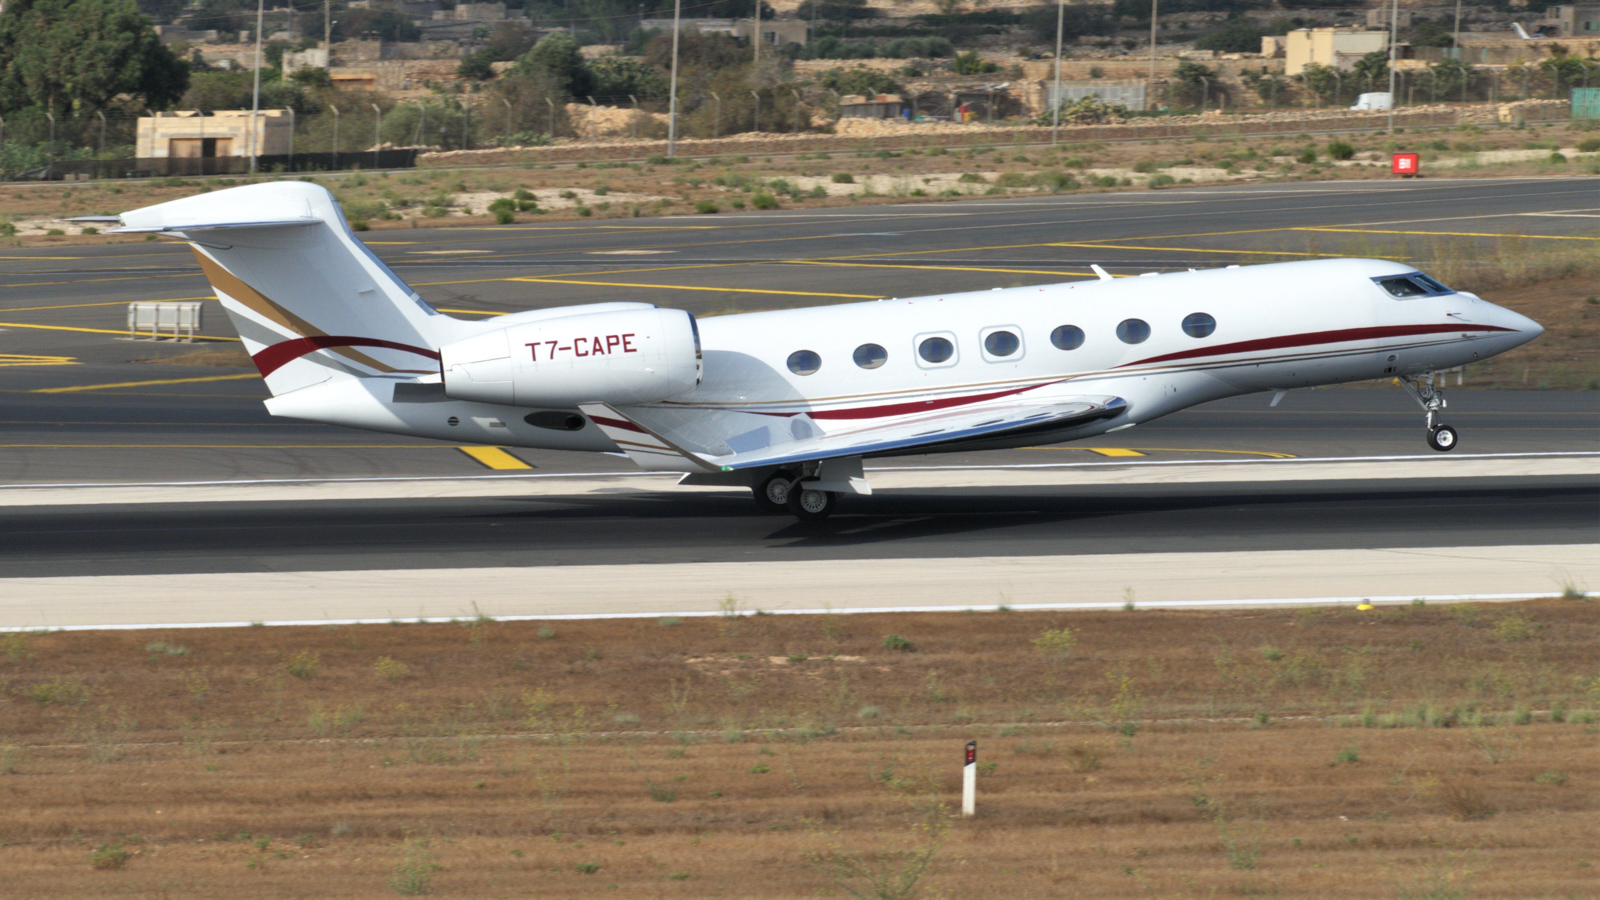 This beautiful Gulfstream G600 flew in from Olbia in Italy on 1st September 2021. Before moving to the San Marino register, the aircraft which belongs to a private individual was registered in the Isle of Man as M-CAPE.